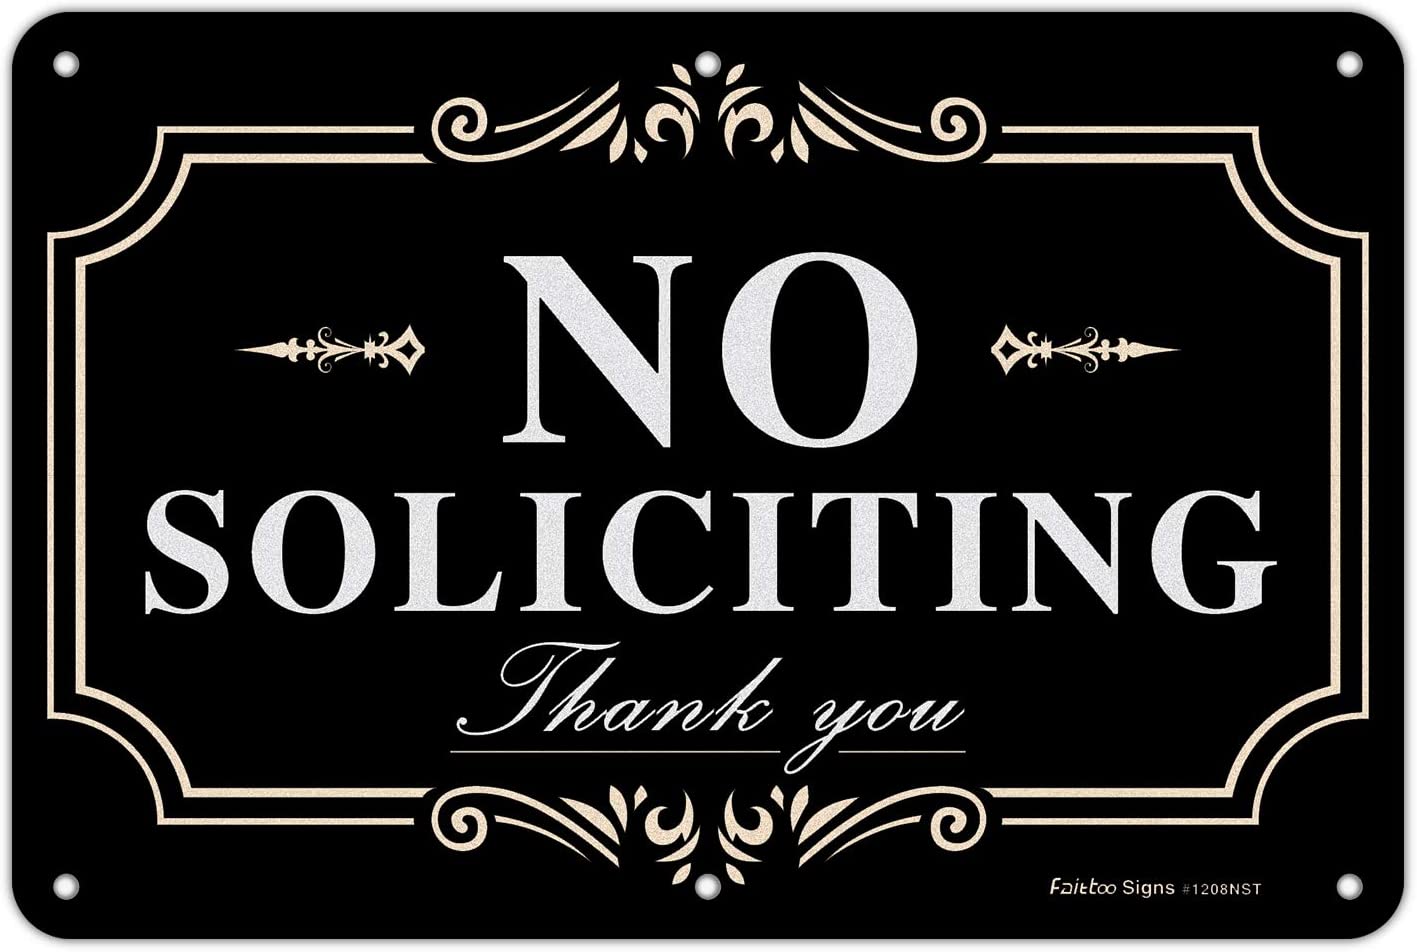 No soliciting Sign for House,Home/Business,12x8 Inch Rust Free Aluminum Metal Sign,Reflective,Fade Resistant,Durable UV and Weather Resistant,Black with White Letters